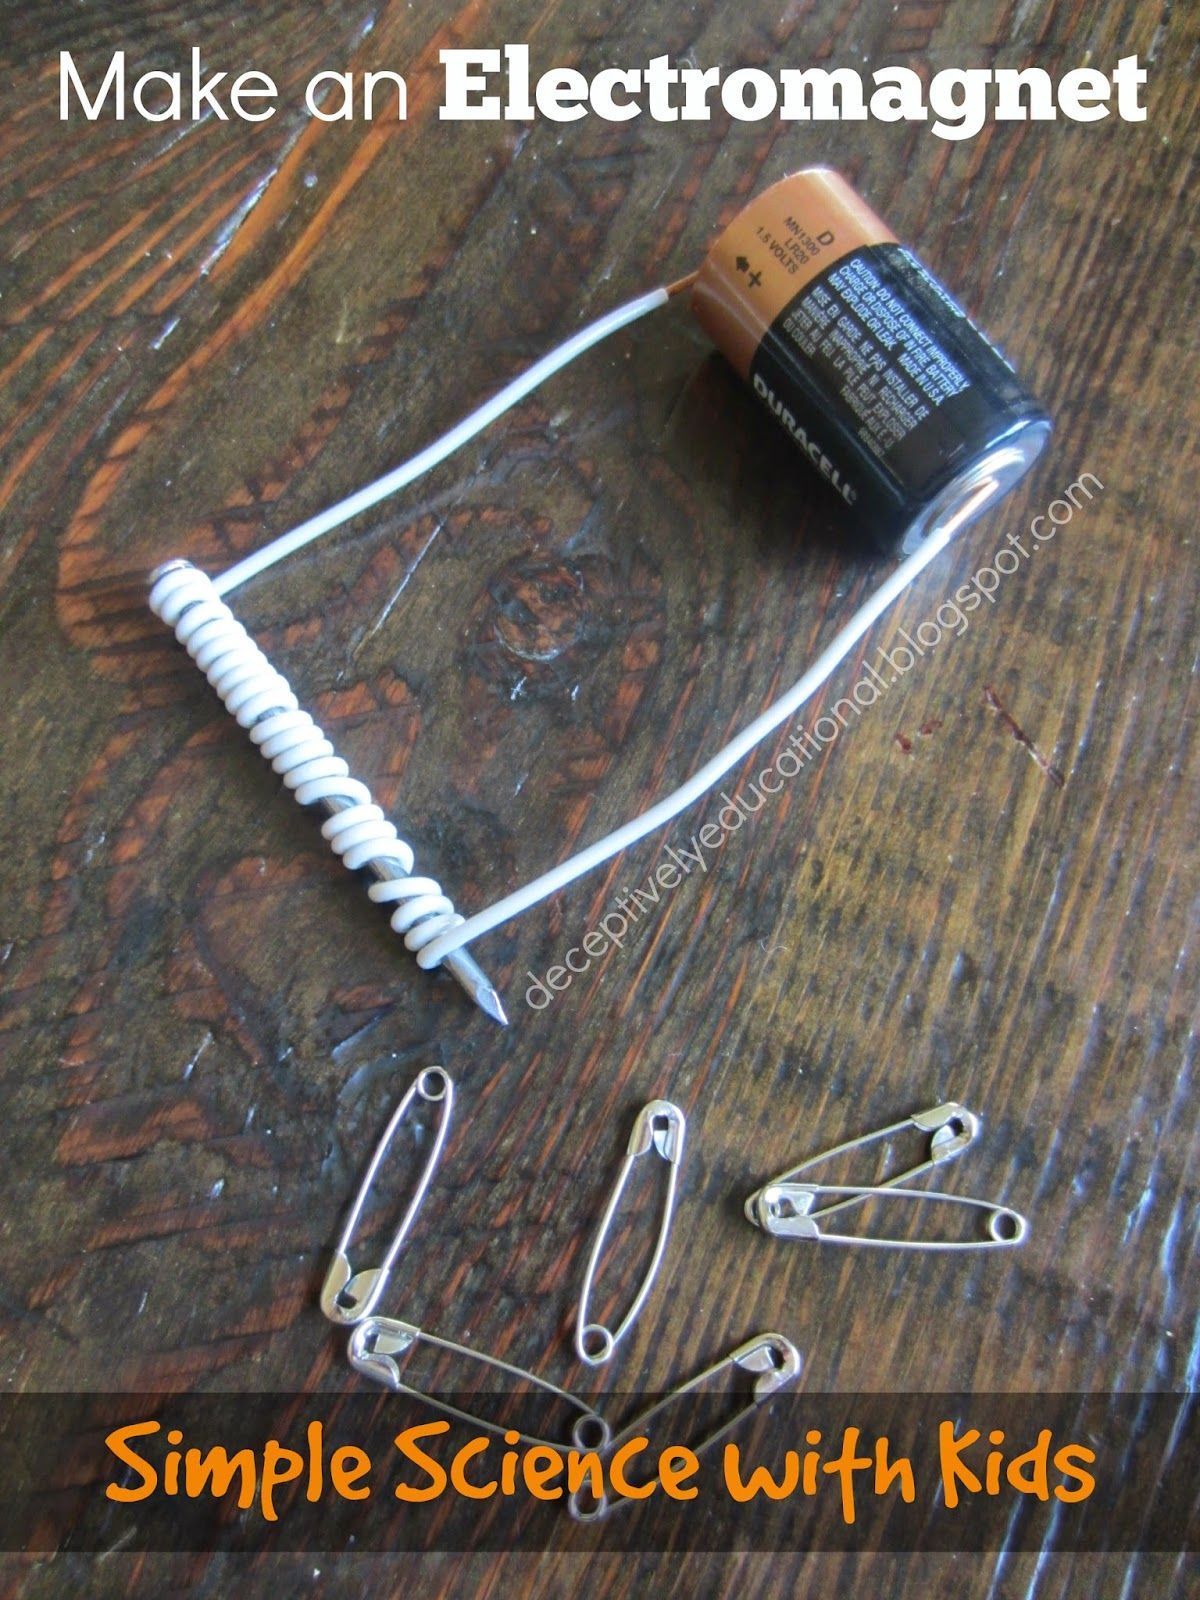 Relentlessly Fun, Deceptively Educational: How to Make an Electromagnet